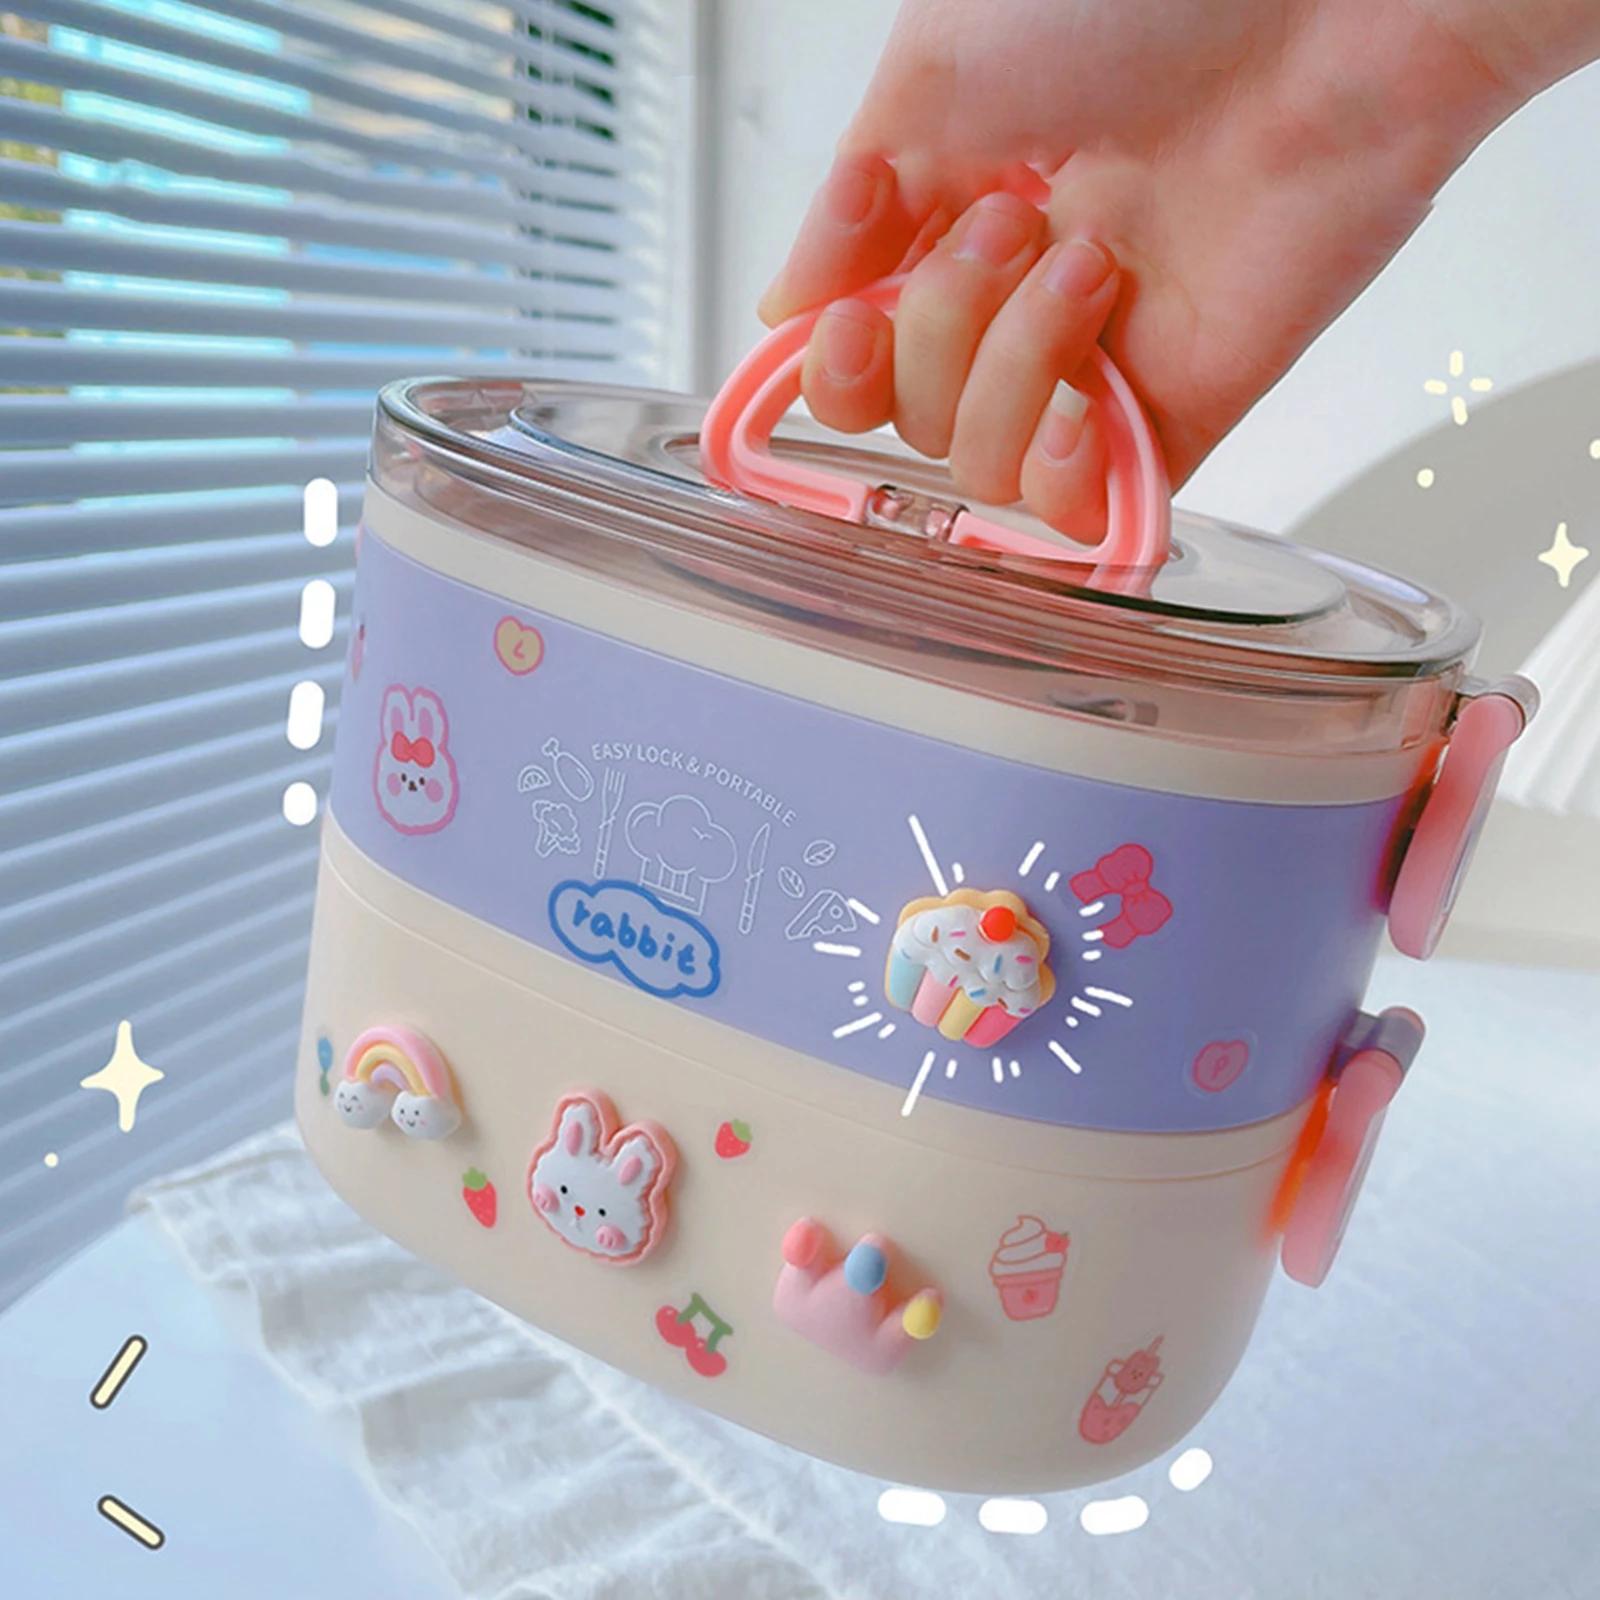 https://ae01.alicdn.com/kf/S85e303bcd74847fe949b0d202a0f18d6r/Kawaii-Bento-Box-Cute-Leakproof-Stackable-Lunch-Box-with-Cartoon-3D-Stickers-Lunch-Container-with-Divided.jpg